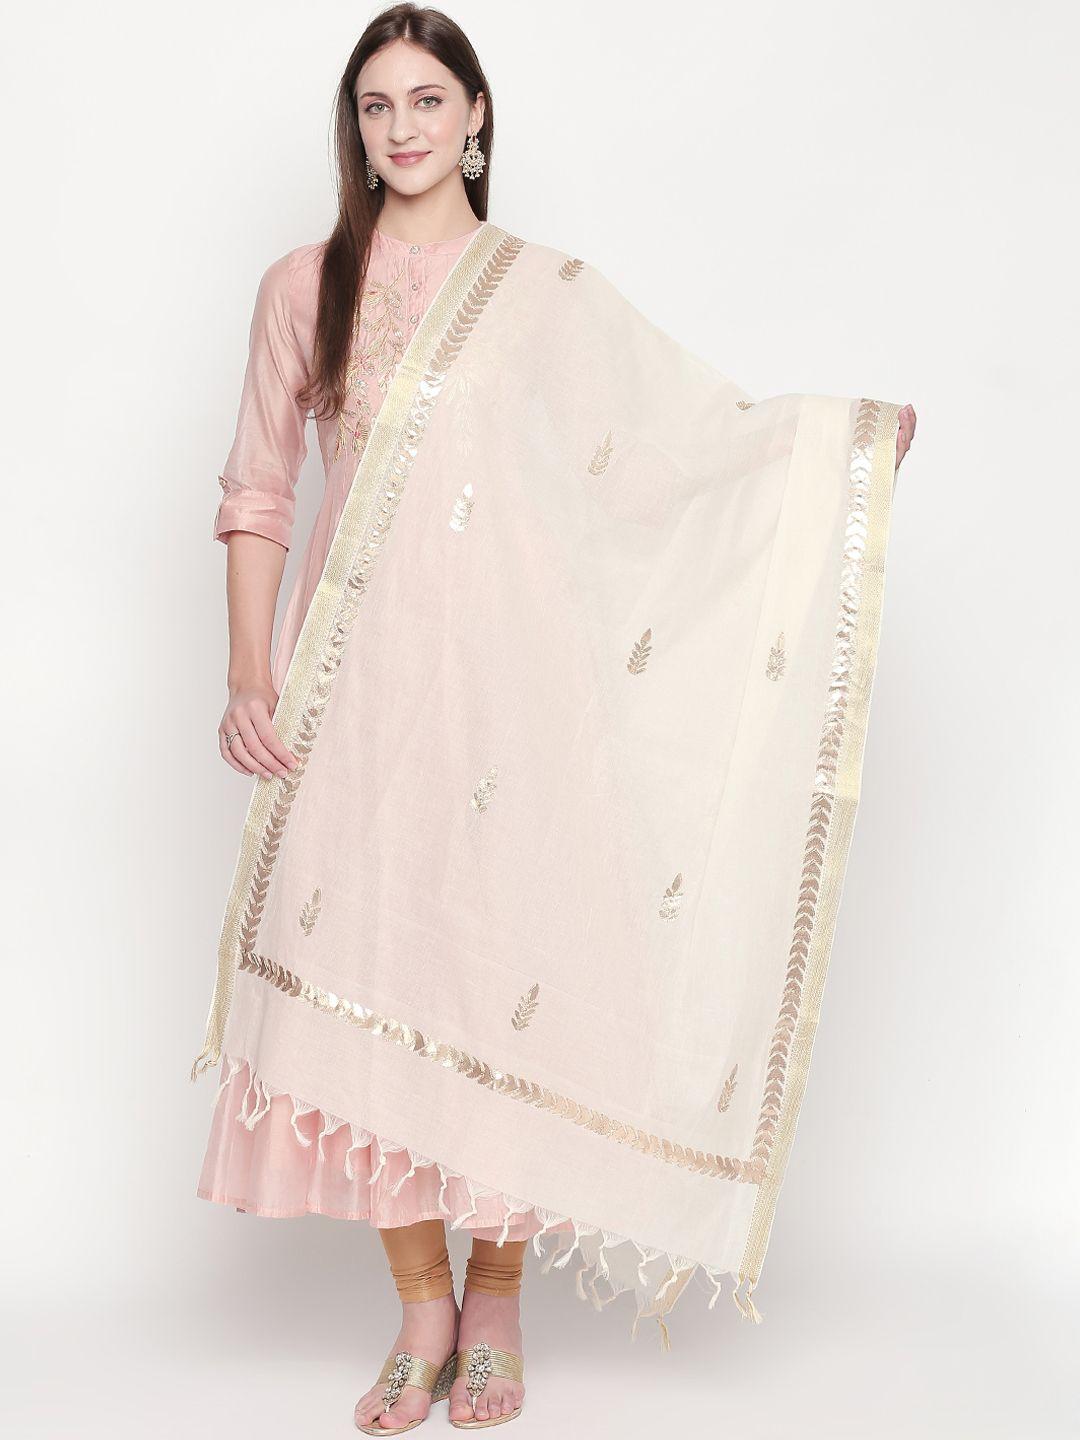 dupatta bazaar off-white & gold-toned embroidered dupatta with gold gotta